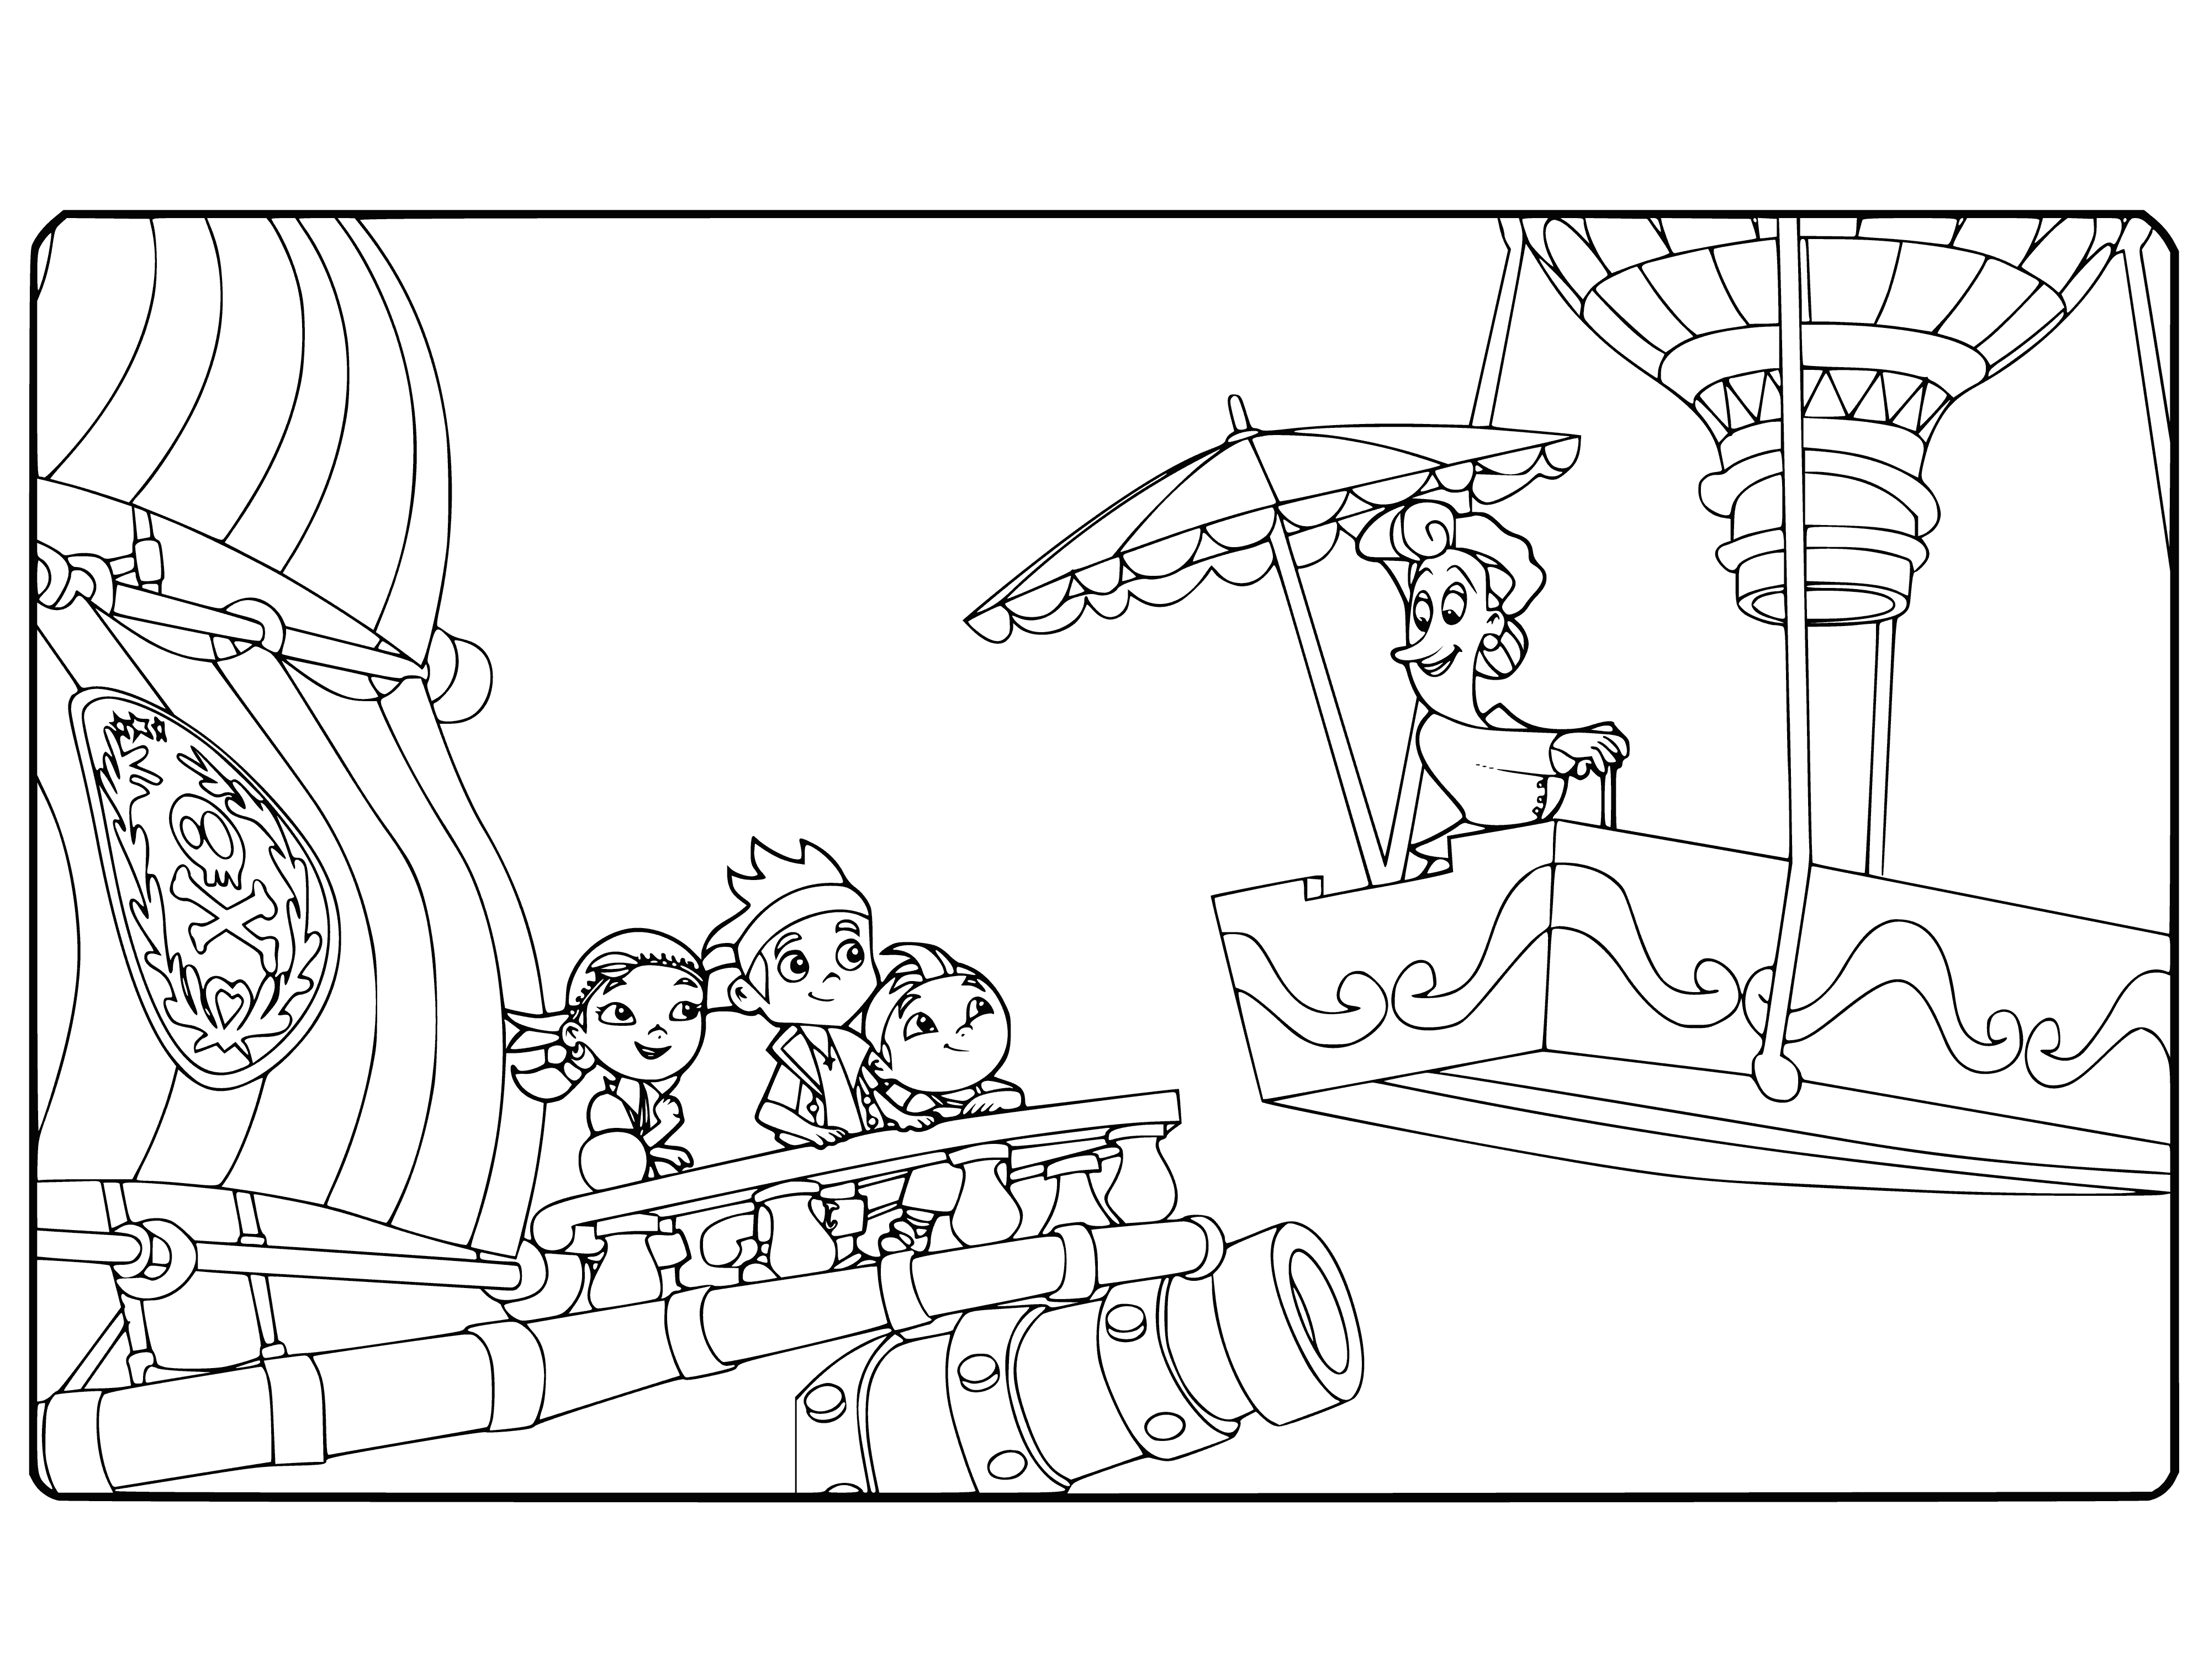 coloring page: Jake and his pals Izzy and Cubby search Never Land for treasure while outsmarting Captain Hook and his crew! #JakeAndTheNeverlandPirates